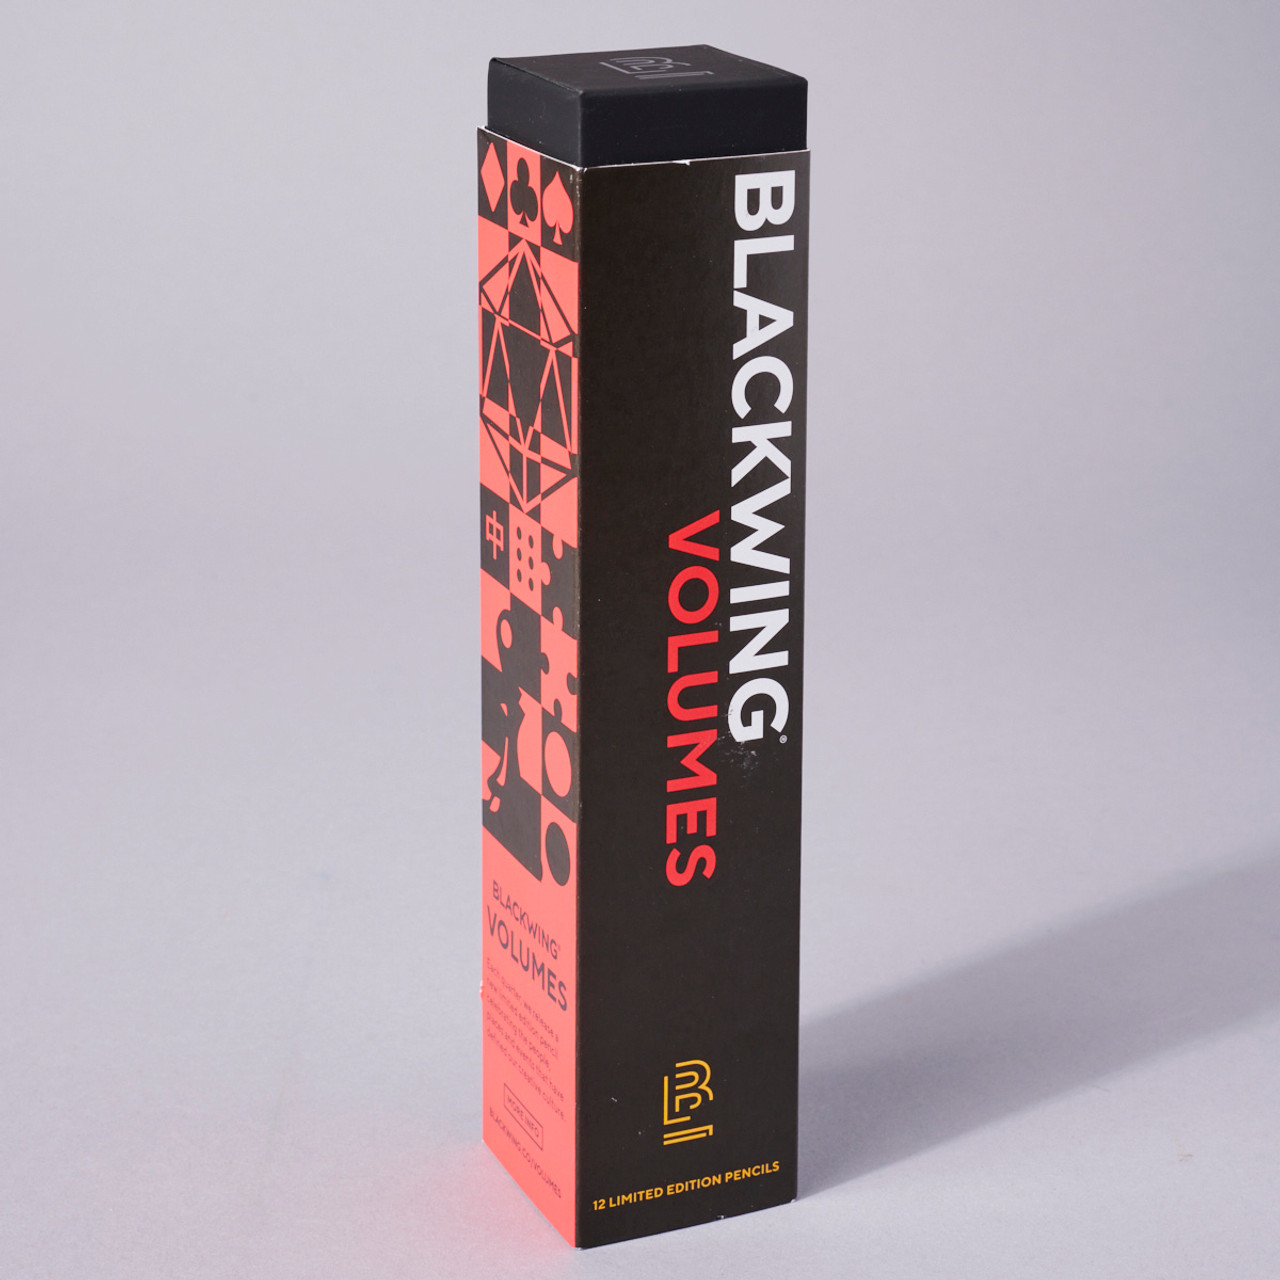 Blackwing Pencil Limited Edition 12 Set Vol. 20 Tabletop Games